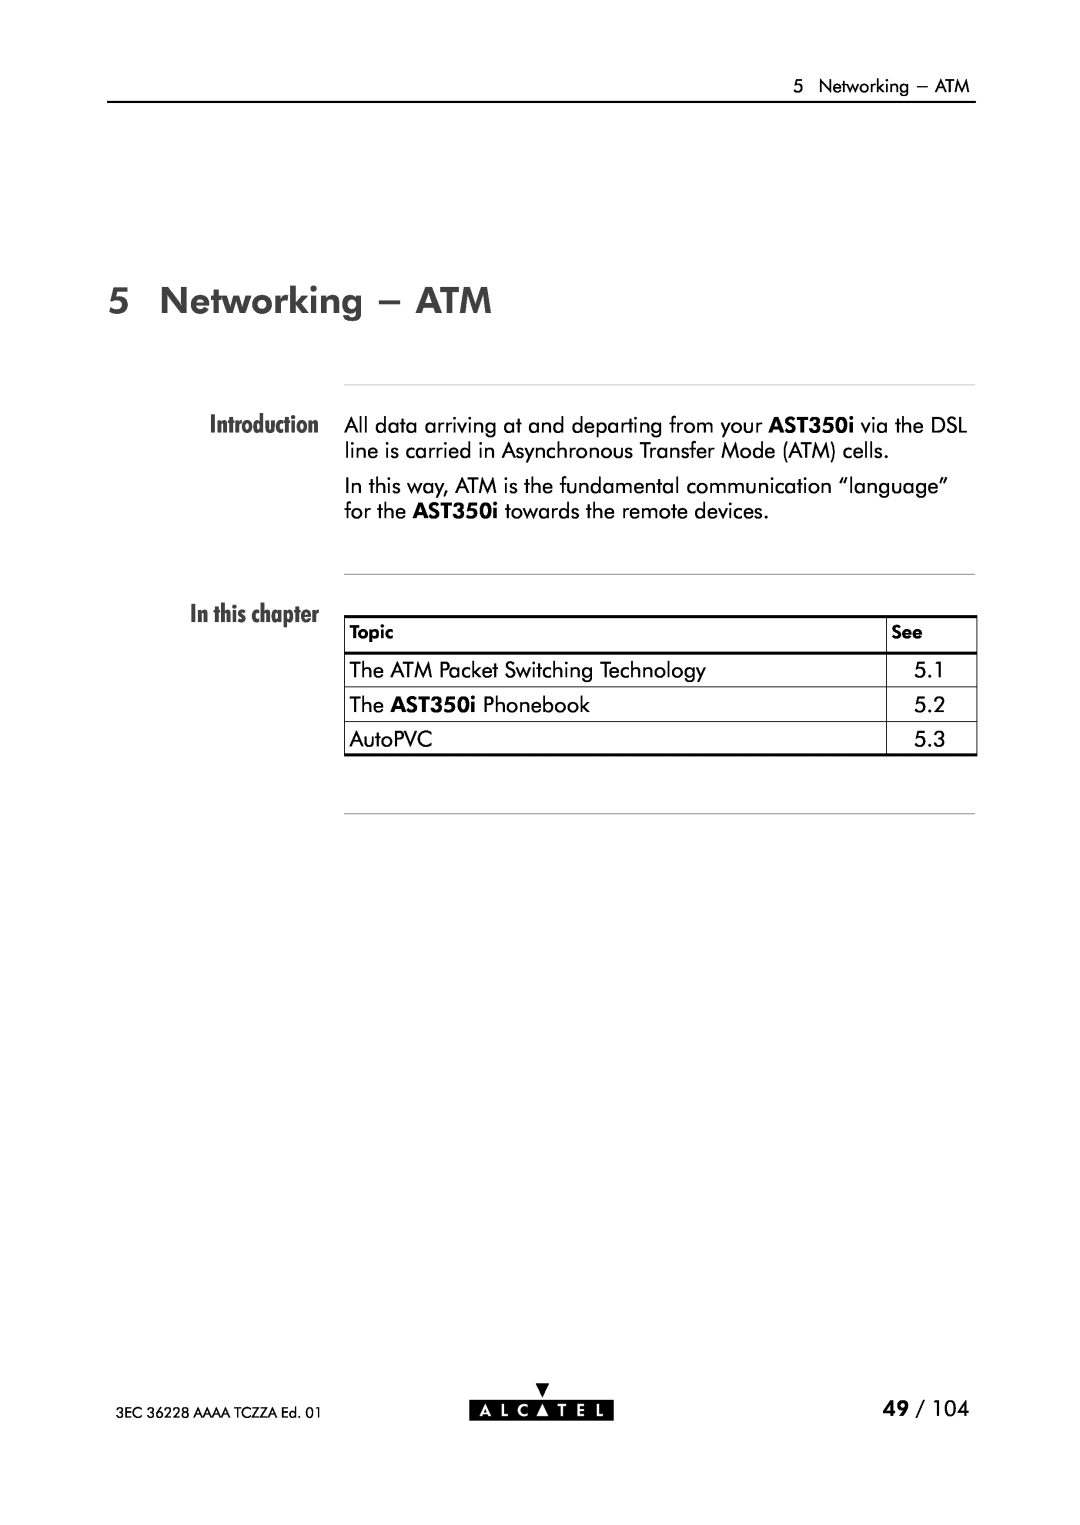 Alcatel Carrier Internetworking Solutions 350I Networking - ATM, In this chapter, 5.1 5.2 5.3, 3EC 36228 AAAA TCZZA Ed 